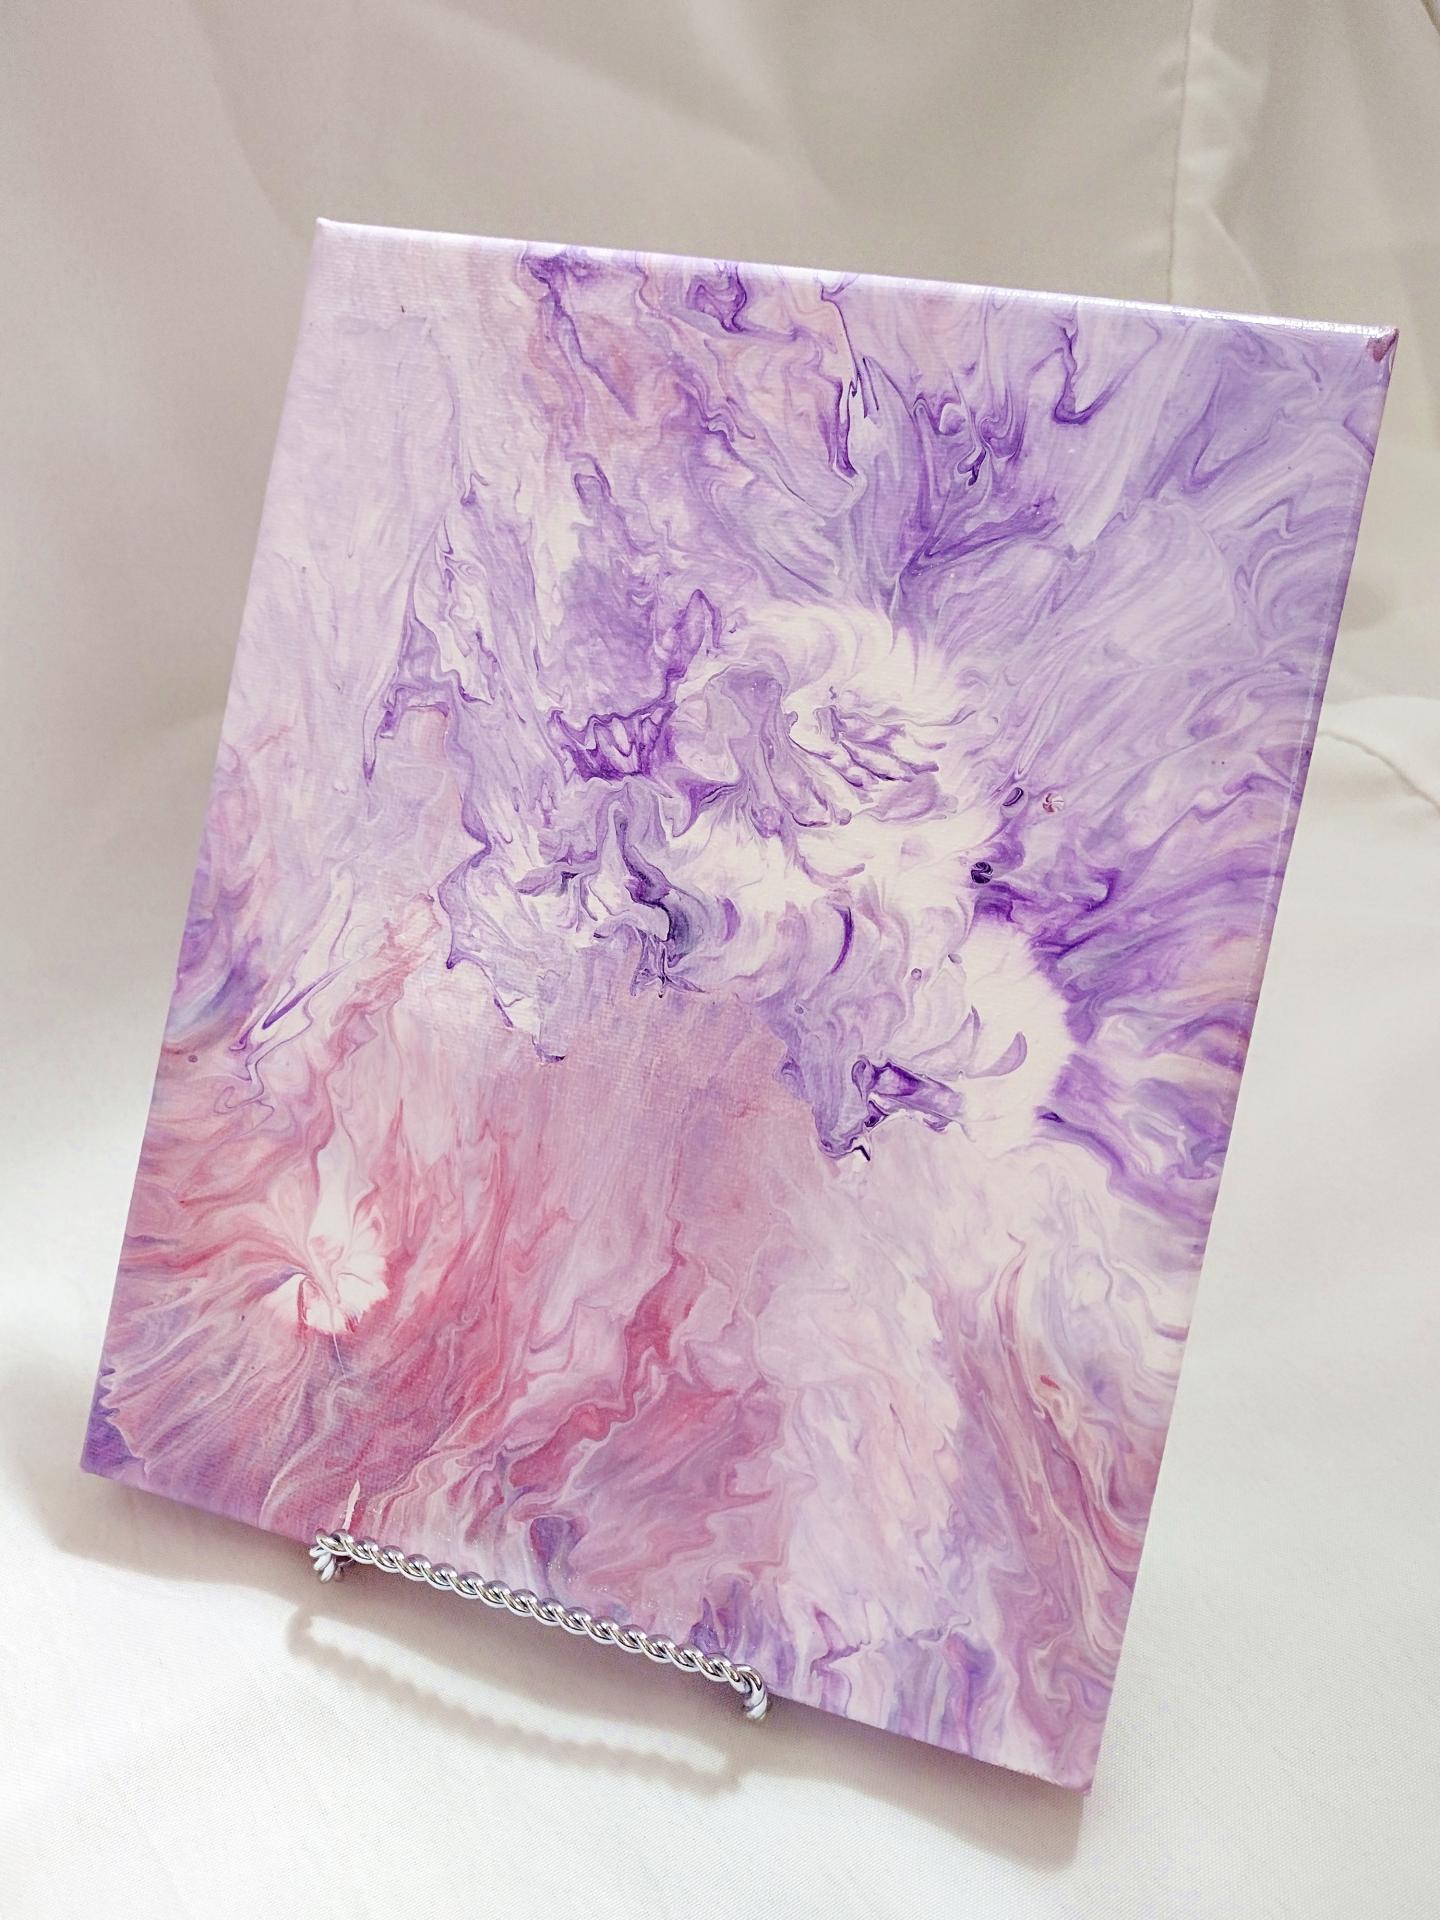 Pink and Purple Floral Abstract Original Acrylic Pour Painting, 8" x 10", Fluid Art Painting